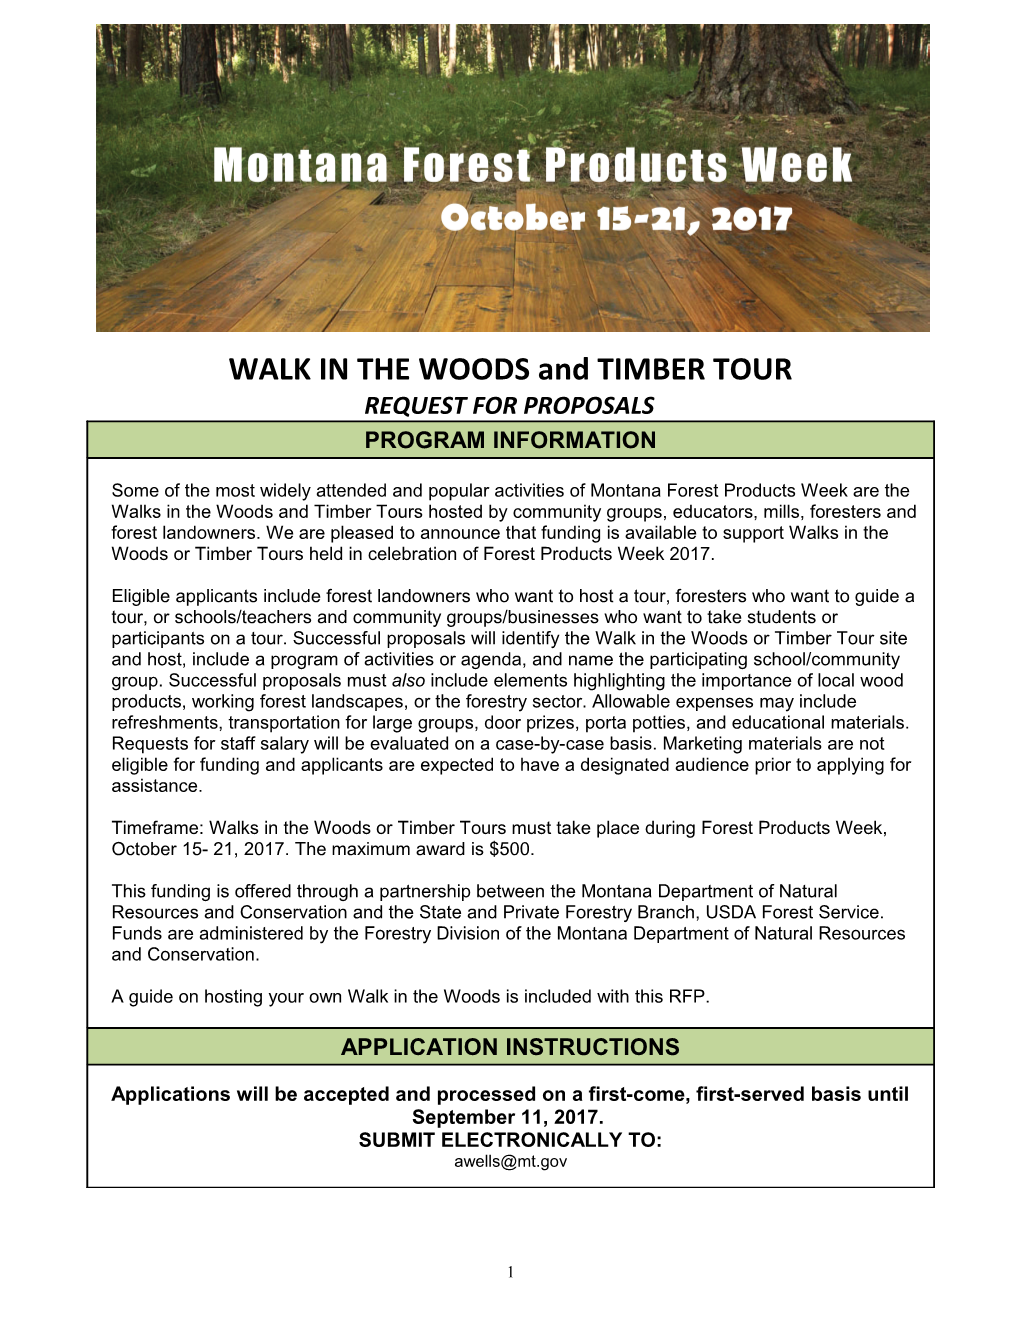 Thanks for Your Interest in Montana Forest Products Week 2017. You Will Receive Notification